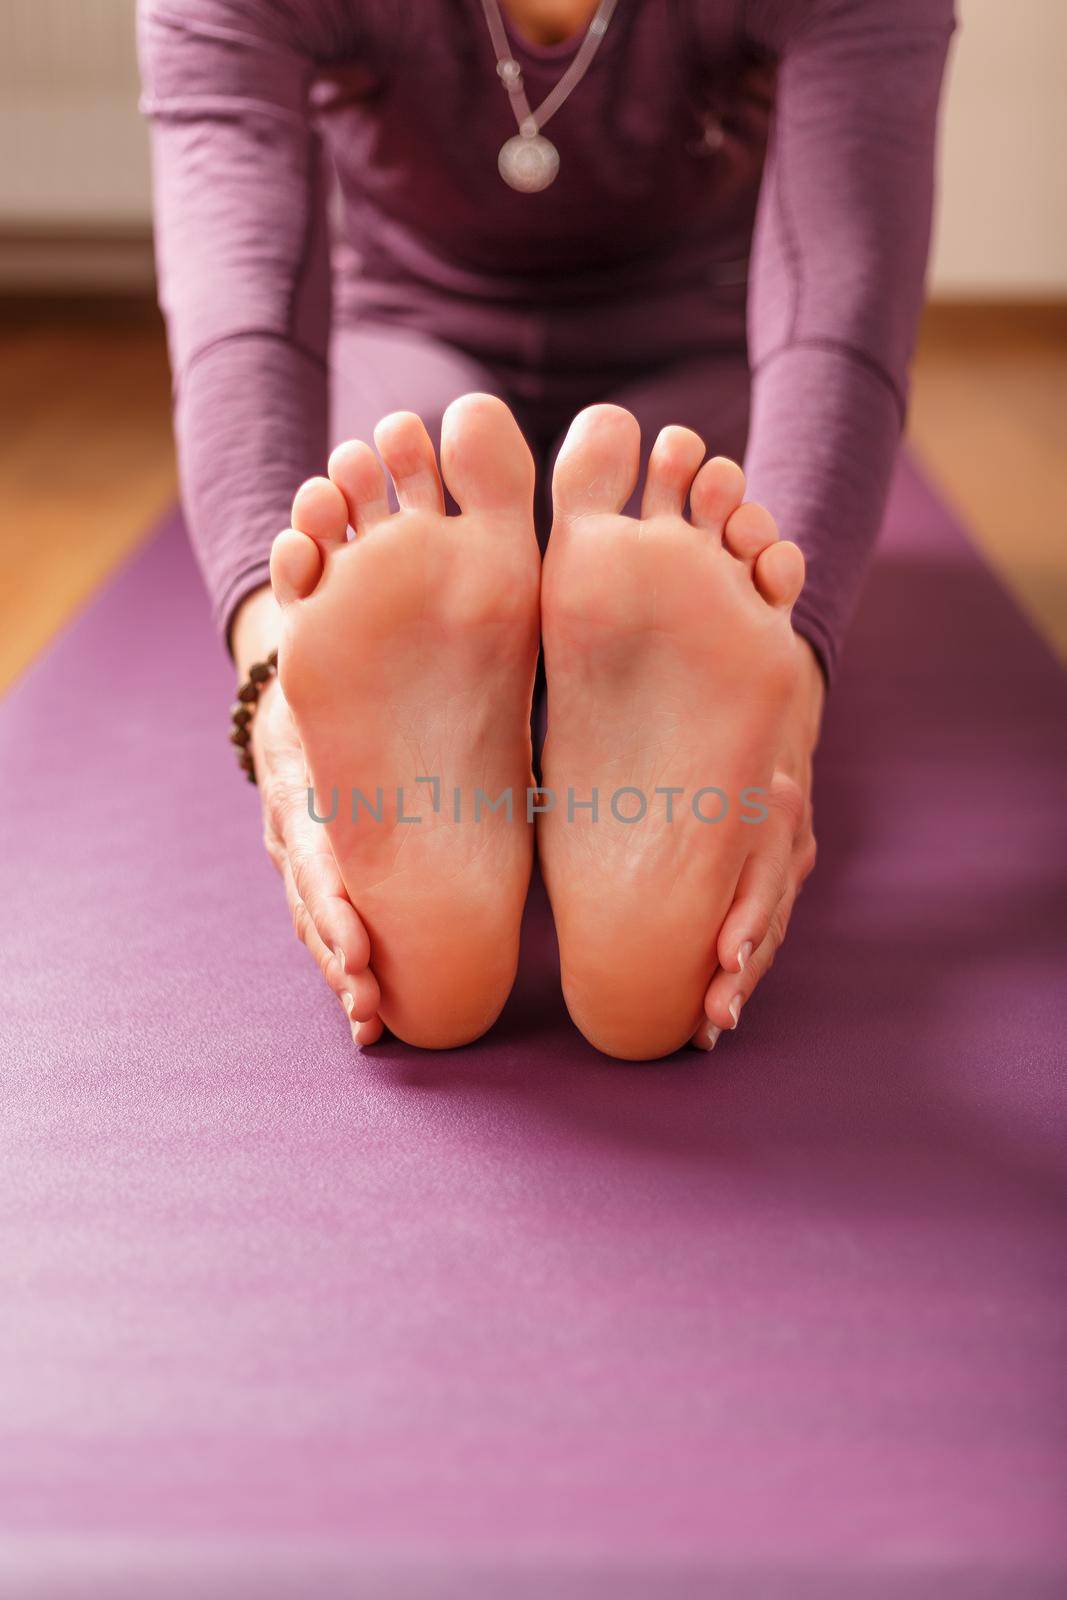 Legs and hands of a woman on a yoga mat practicing asanas by AlexGrec